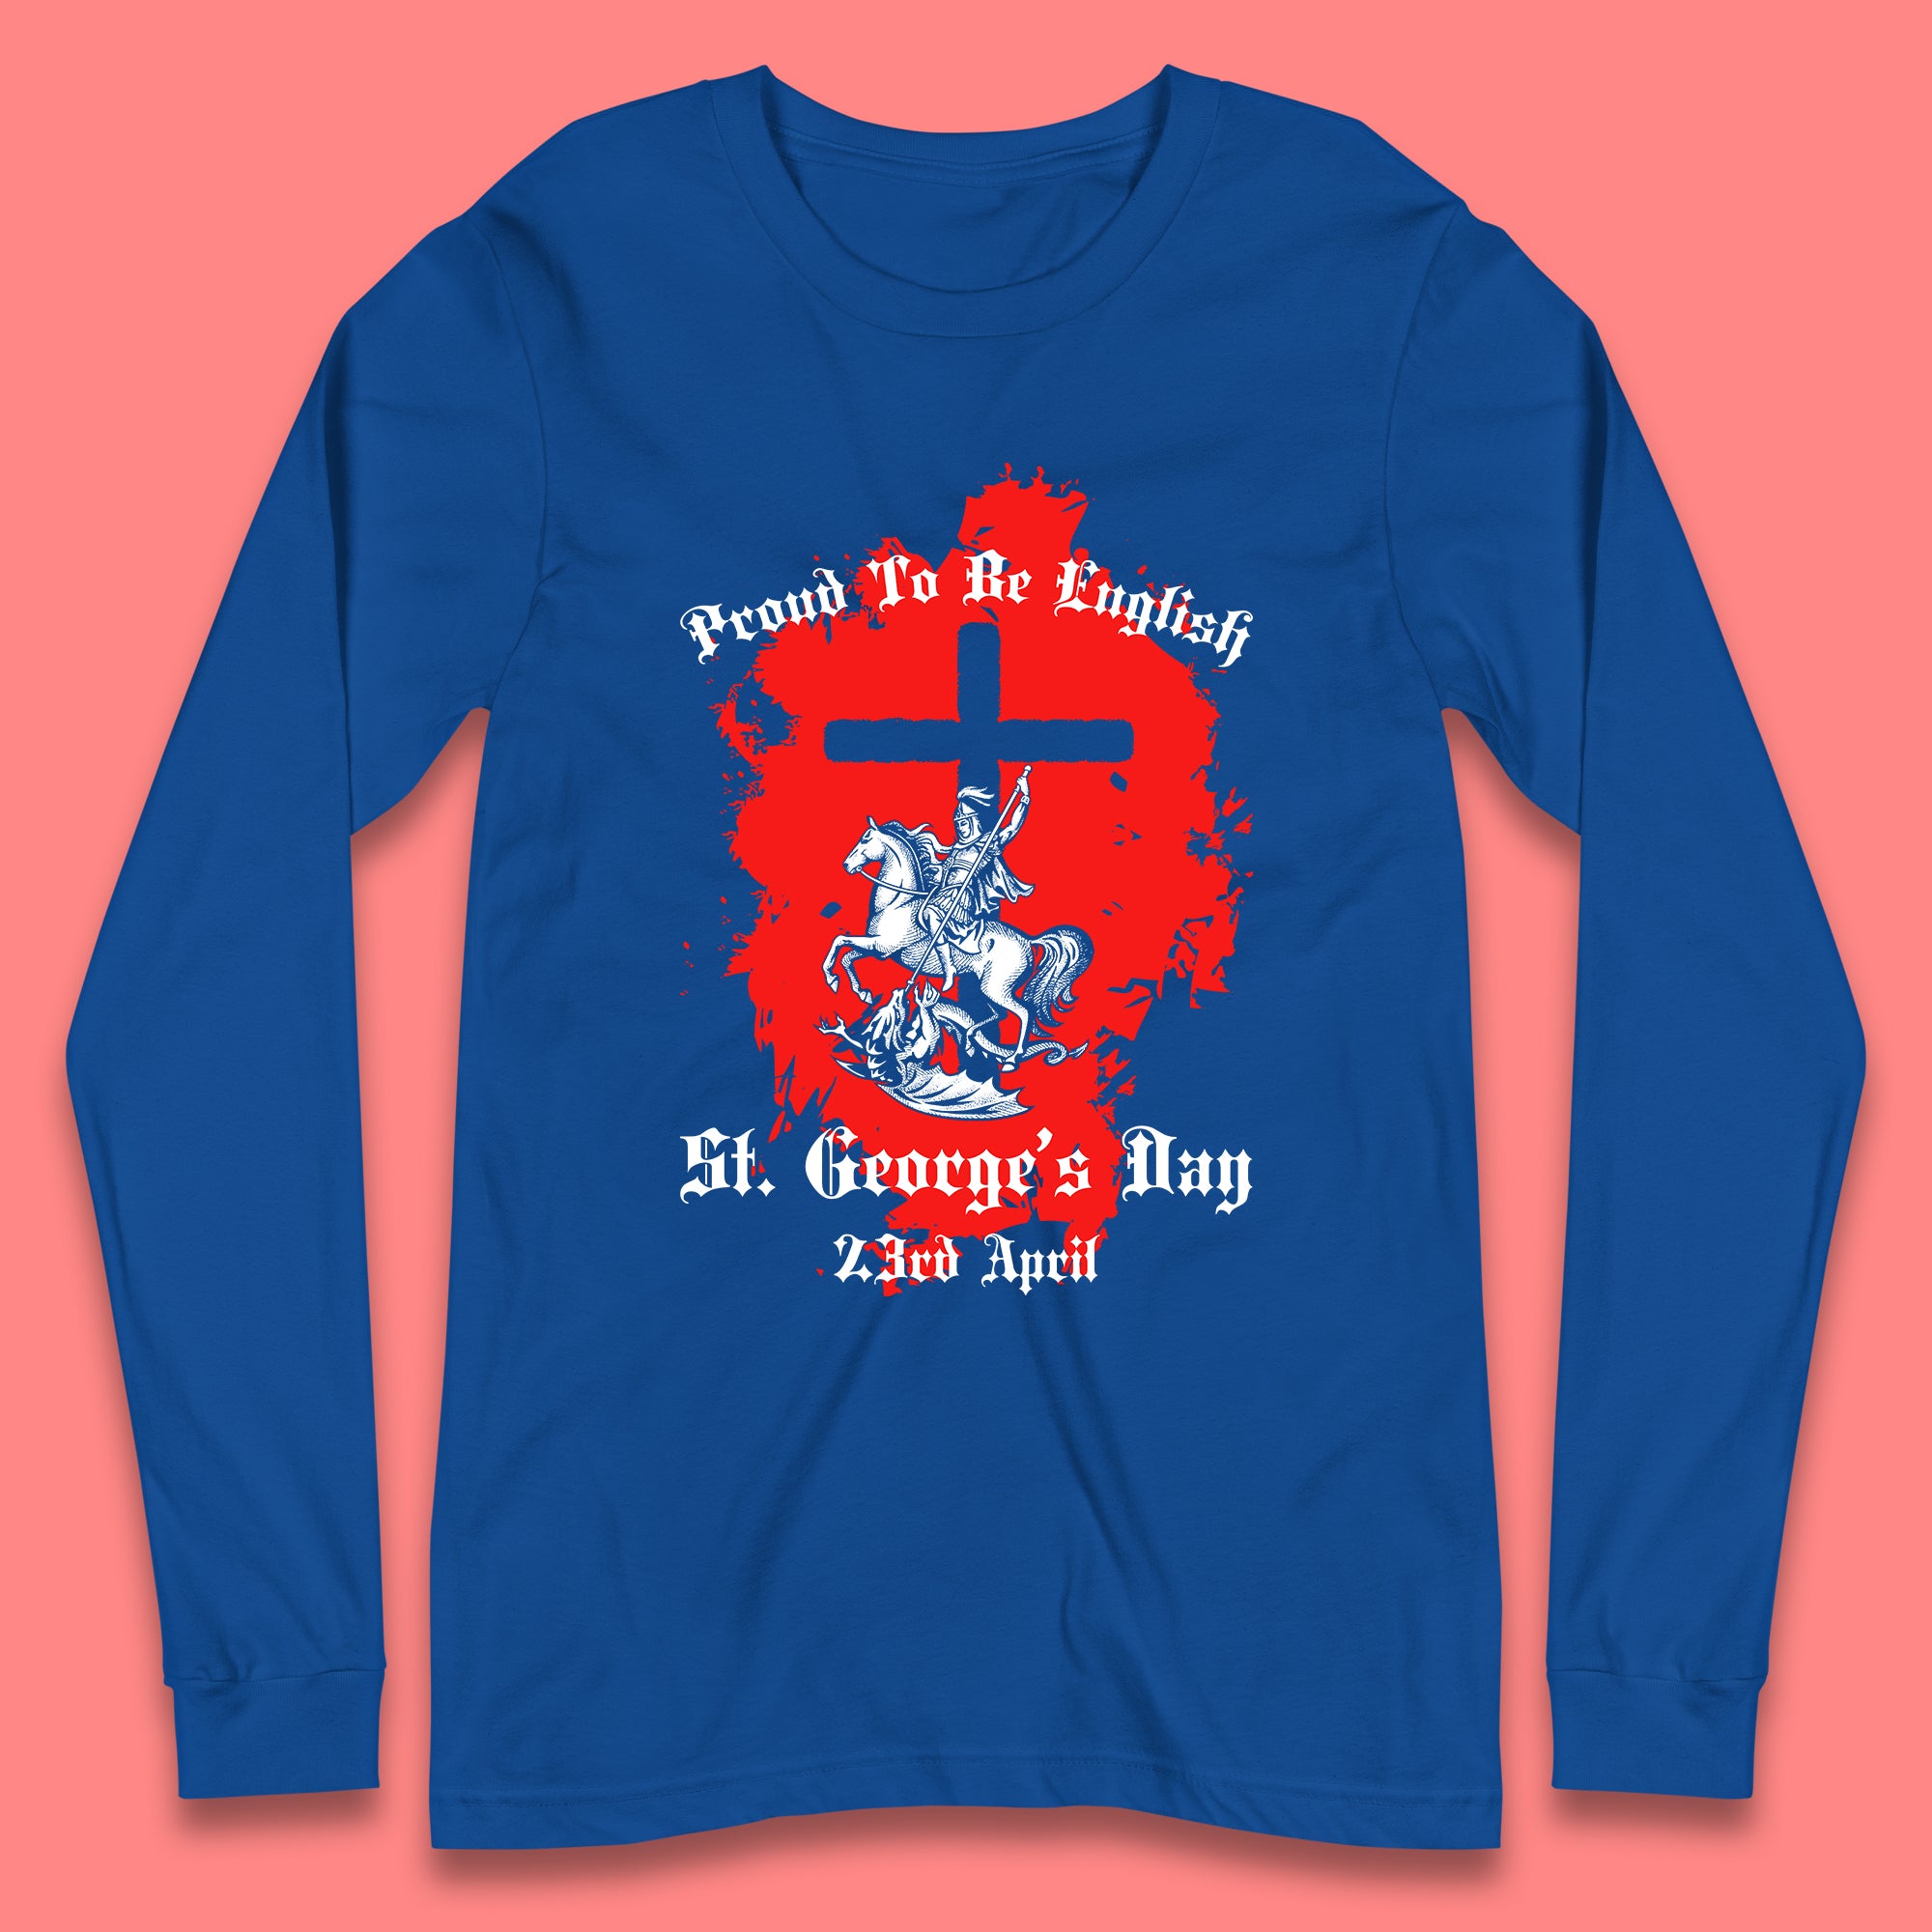 St. George's Day Long Sleeve T-Shirt